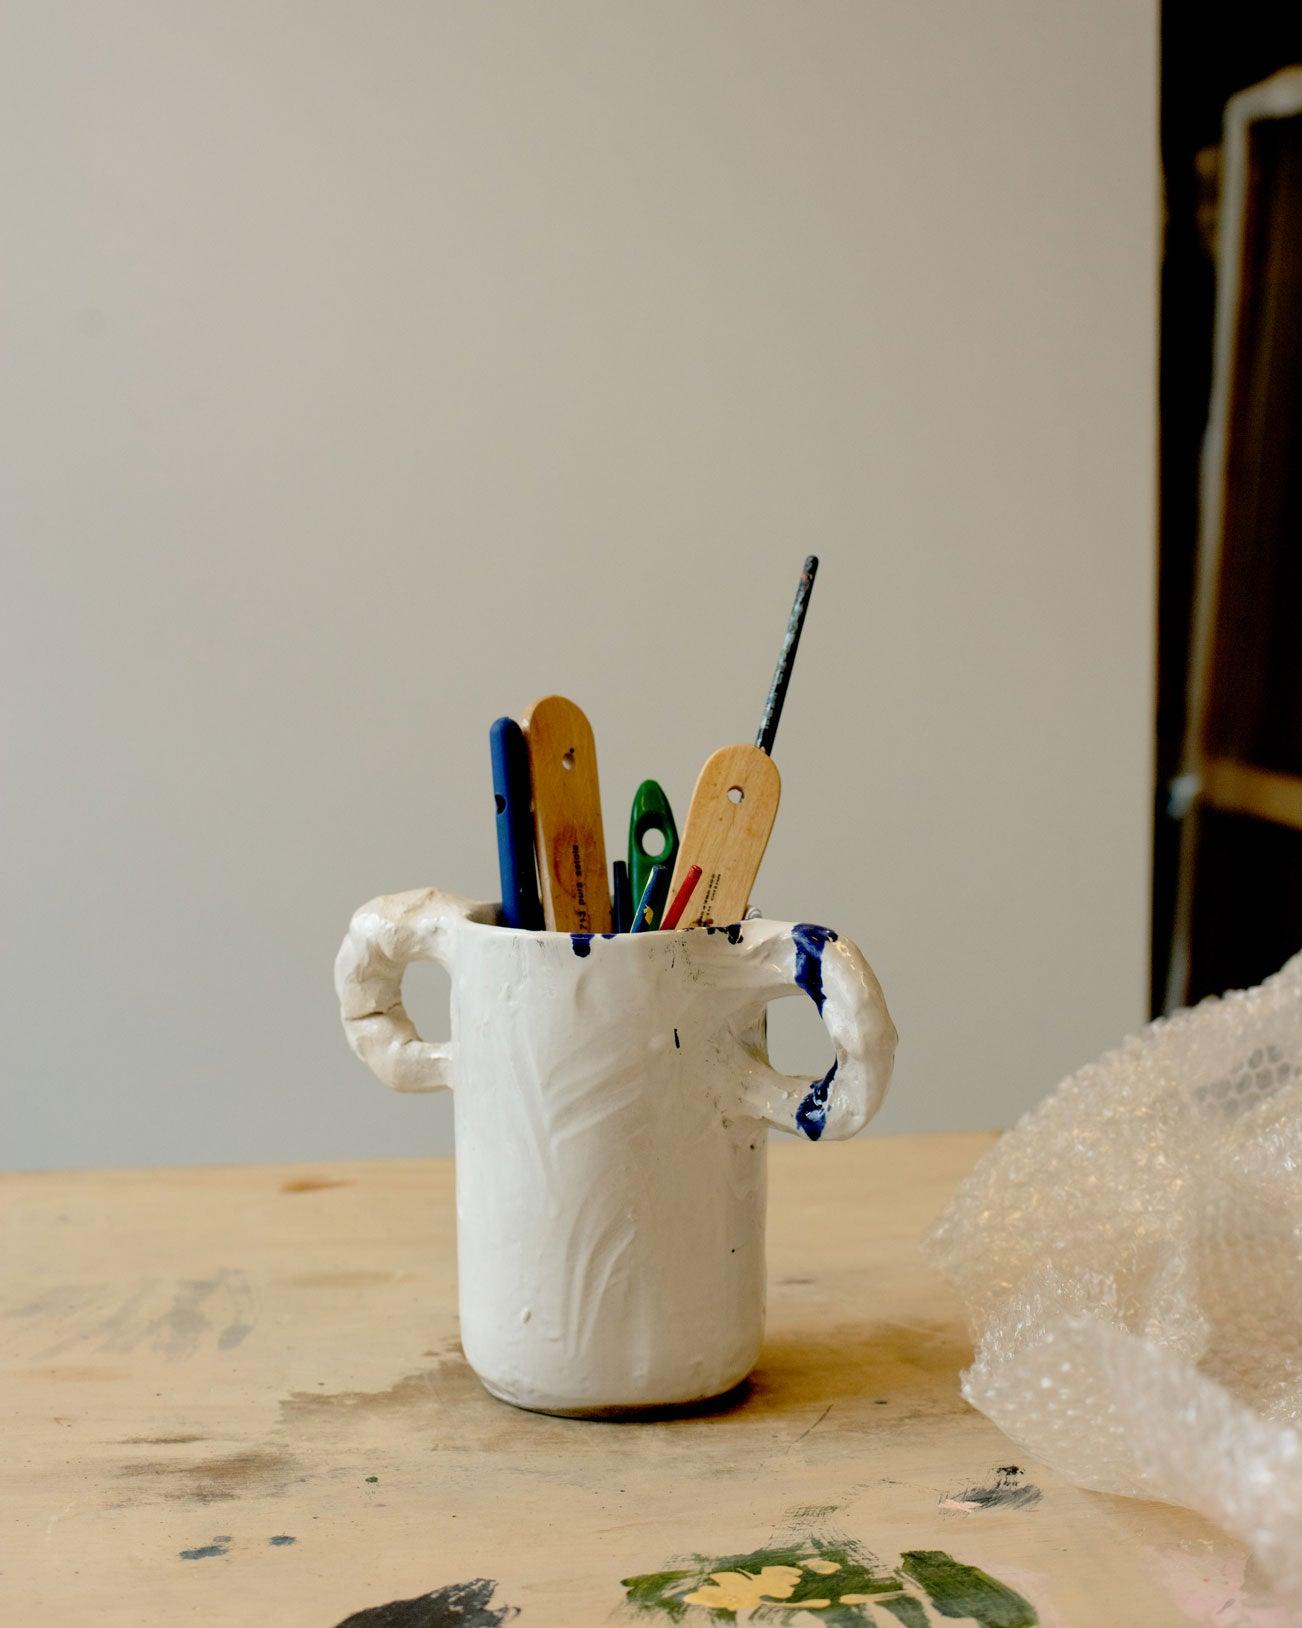 White modern ceramic vase with two handles diagonally positioned and covered with pencils on a white background